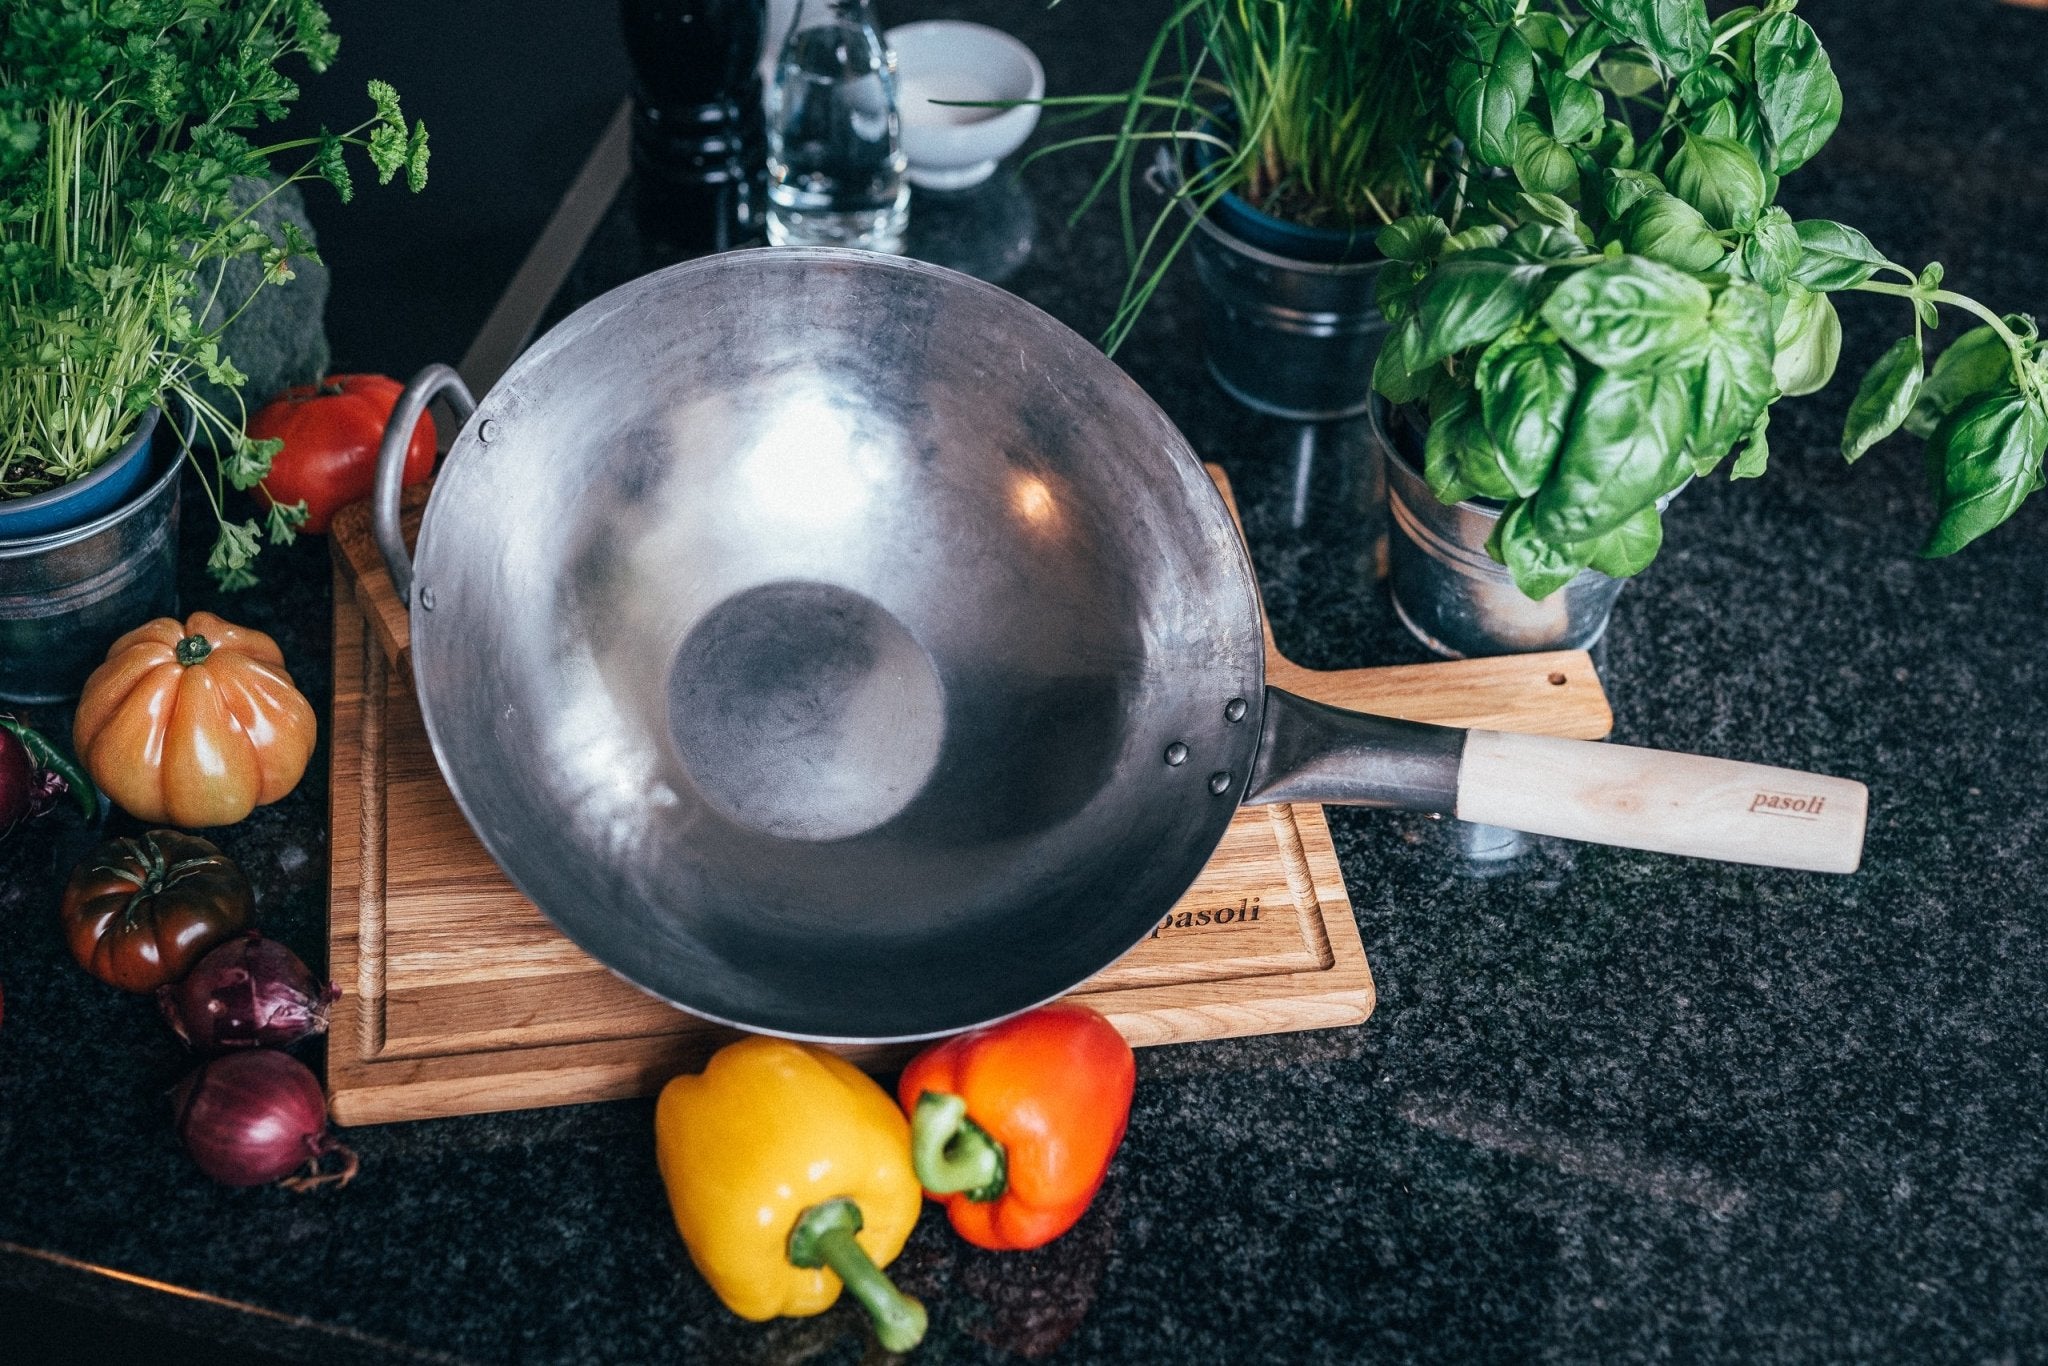 What do I have to consider when cleaning my wok? - pasoli